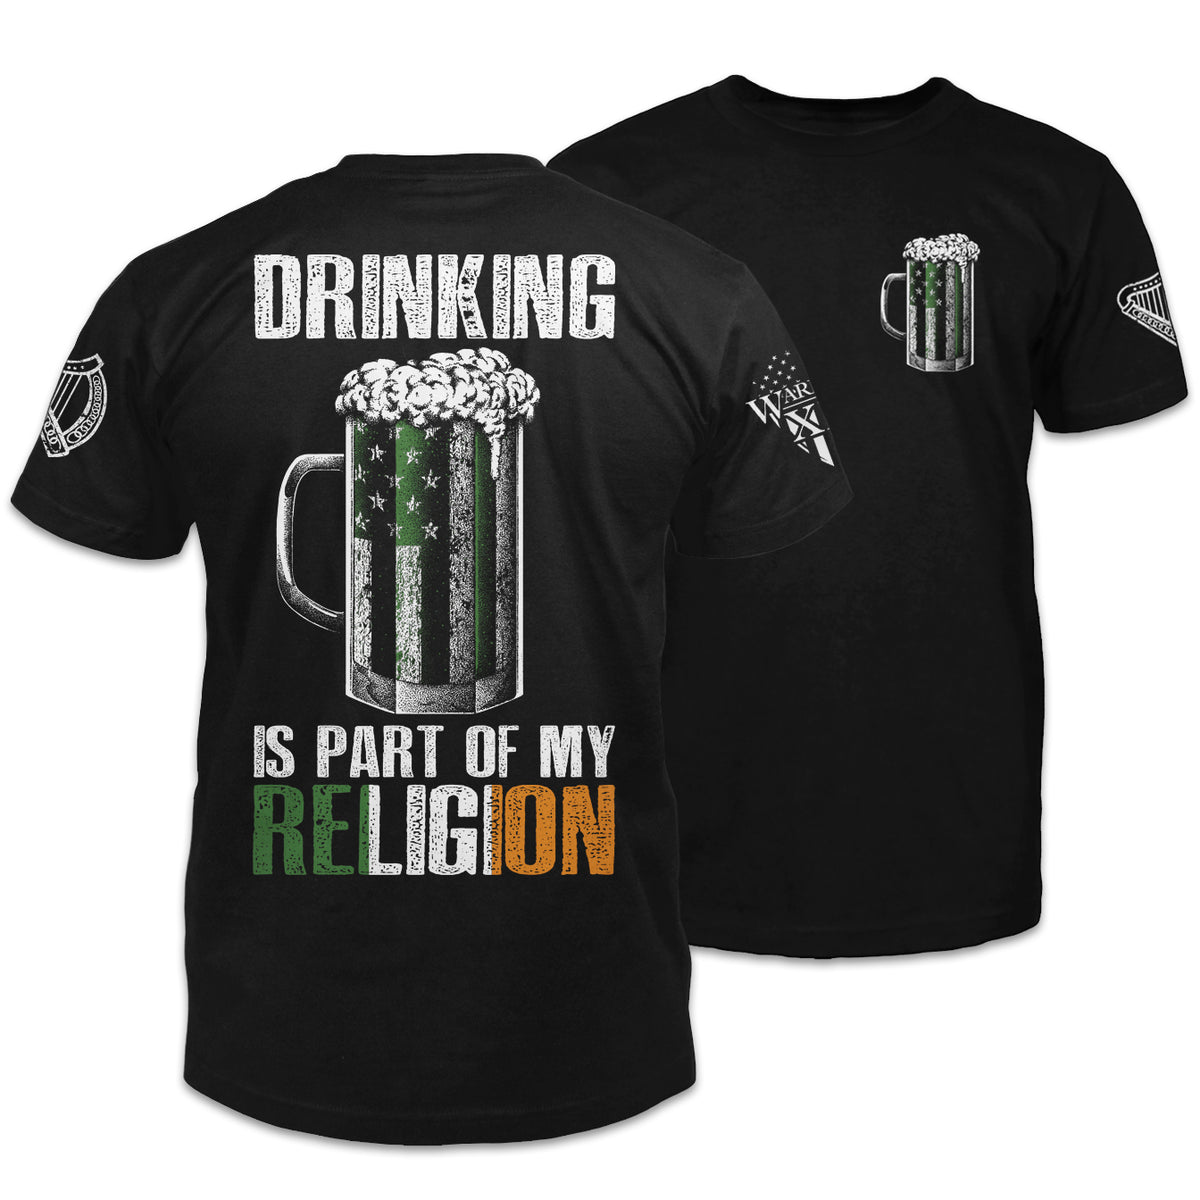 Front and back black t-shirt with the words "Drinking is part of my religion" with a USA/Irish themed beer mug printed on the shirt.